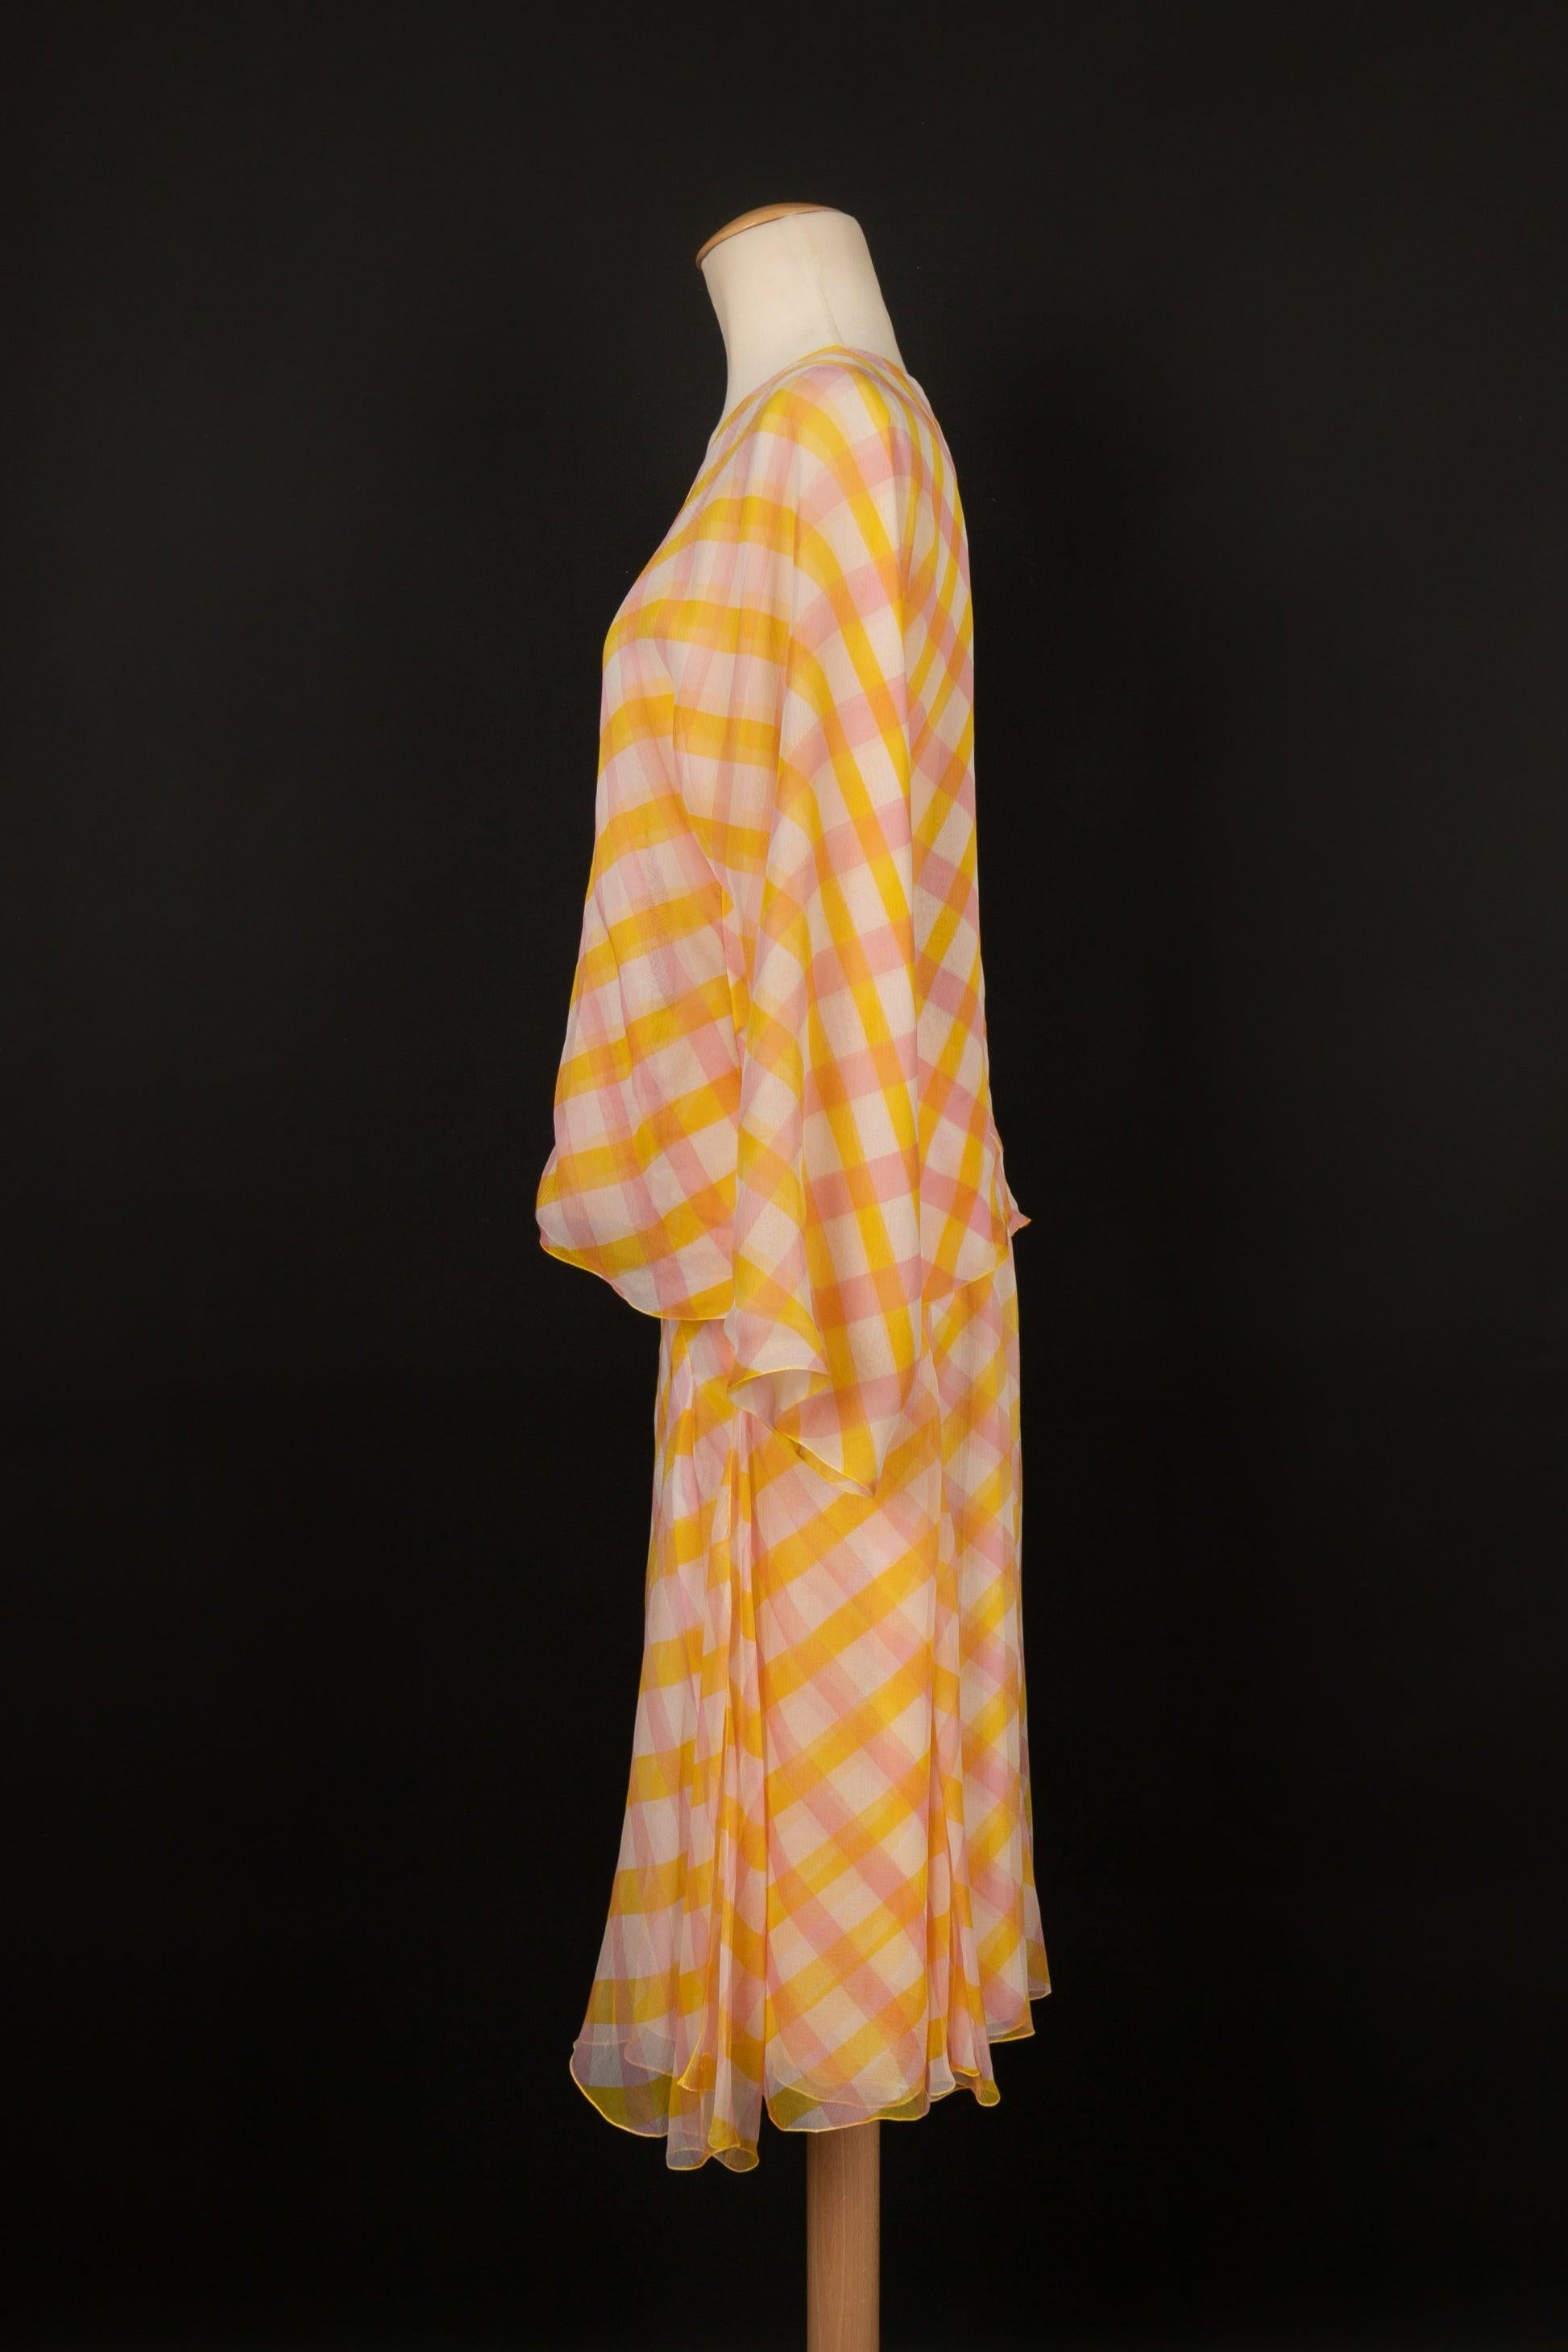 Chanel - (Made in France) Set composed of a tied top and a skirt in silk muslin crepe printed with a yellow, pink, and off-white checked pattern. Indicated size 38FR. Cruise 1999 Collection.

Additional information:
Condition: Very good